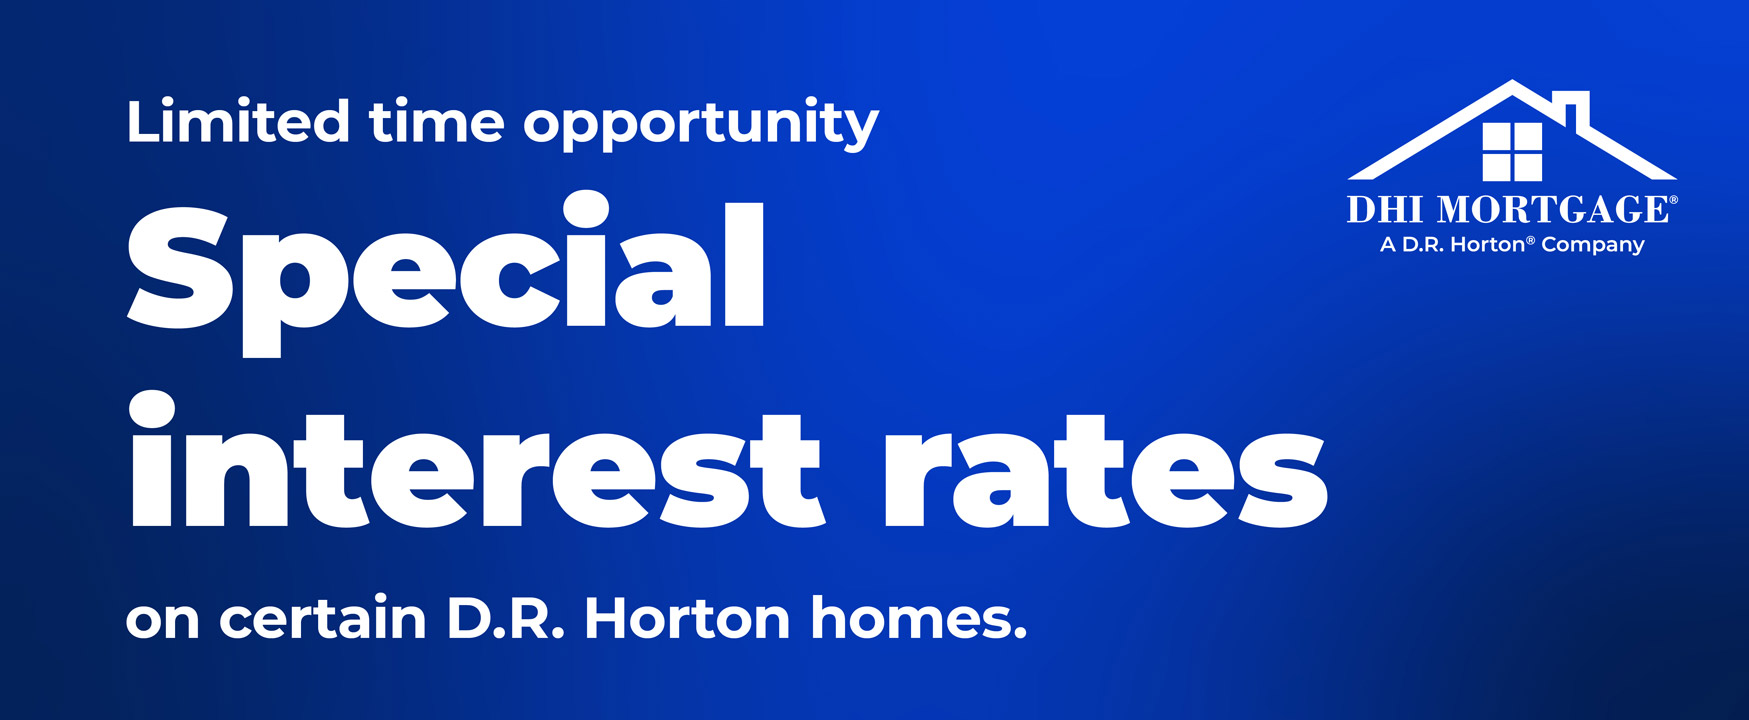 Limited time opportunity. Special interest rates on certain D.R. Horton homes. D.H.I. Mortgage logo in the top left. Blue background.